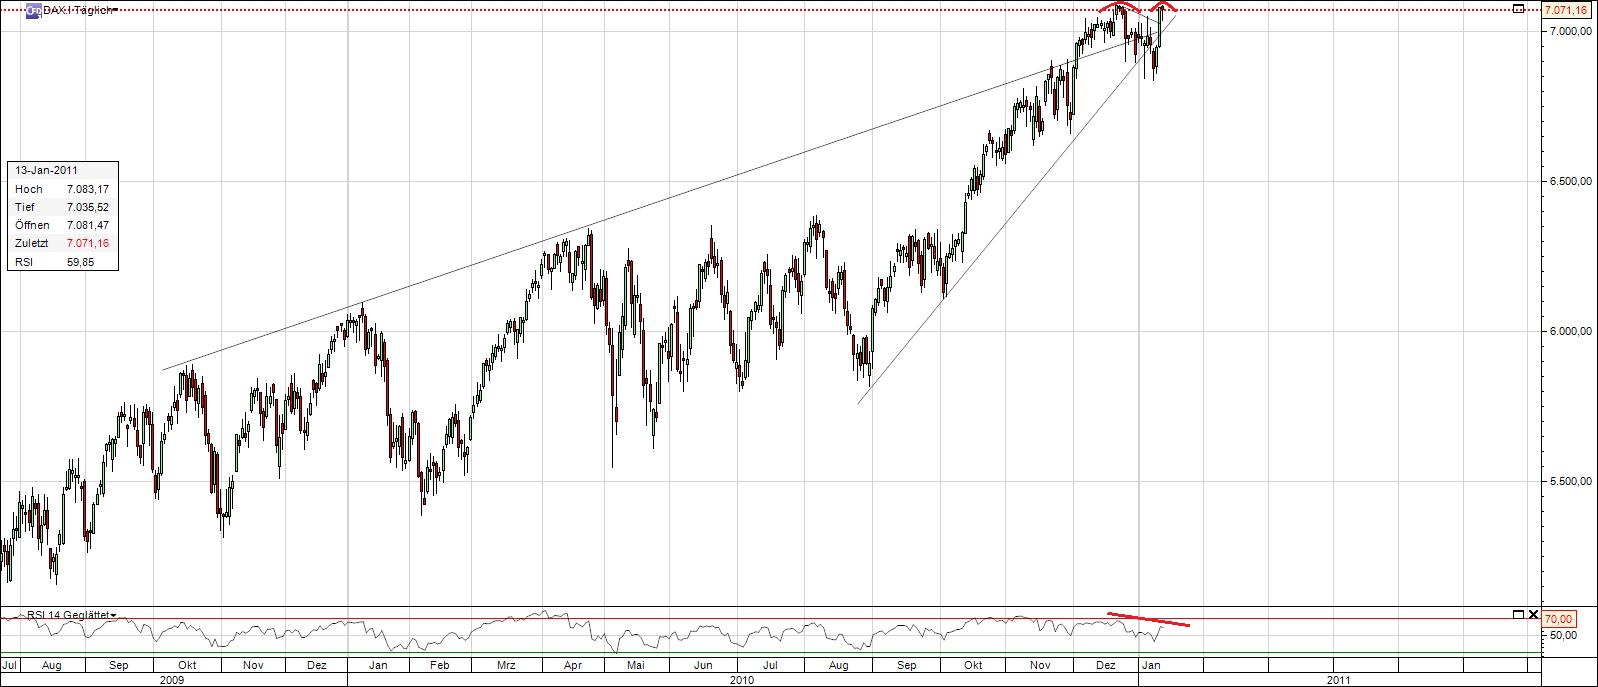 Quo Vadis Dax 2011 - All Time High? 372951